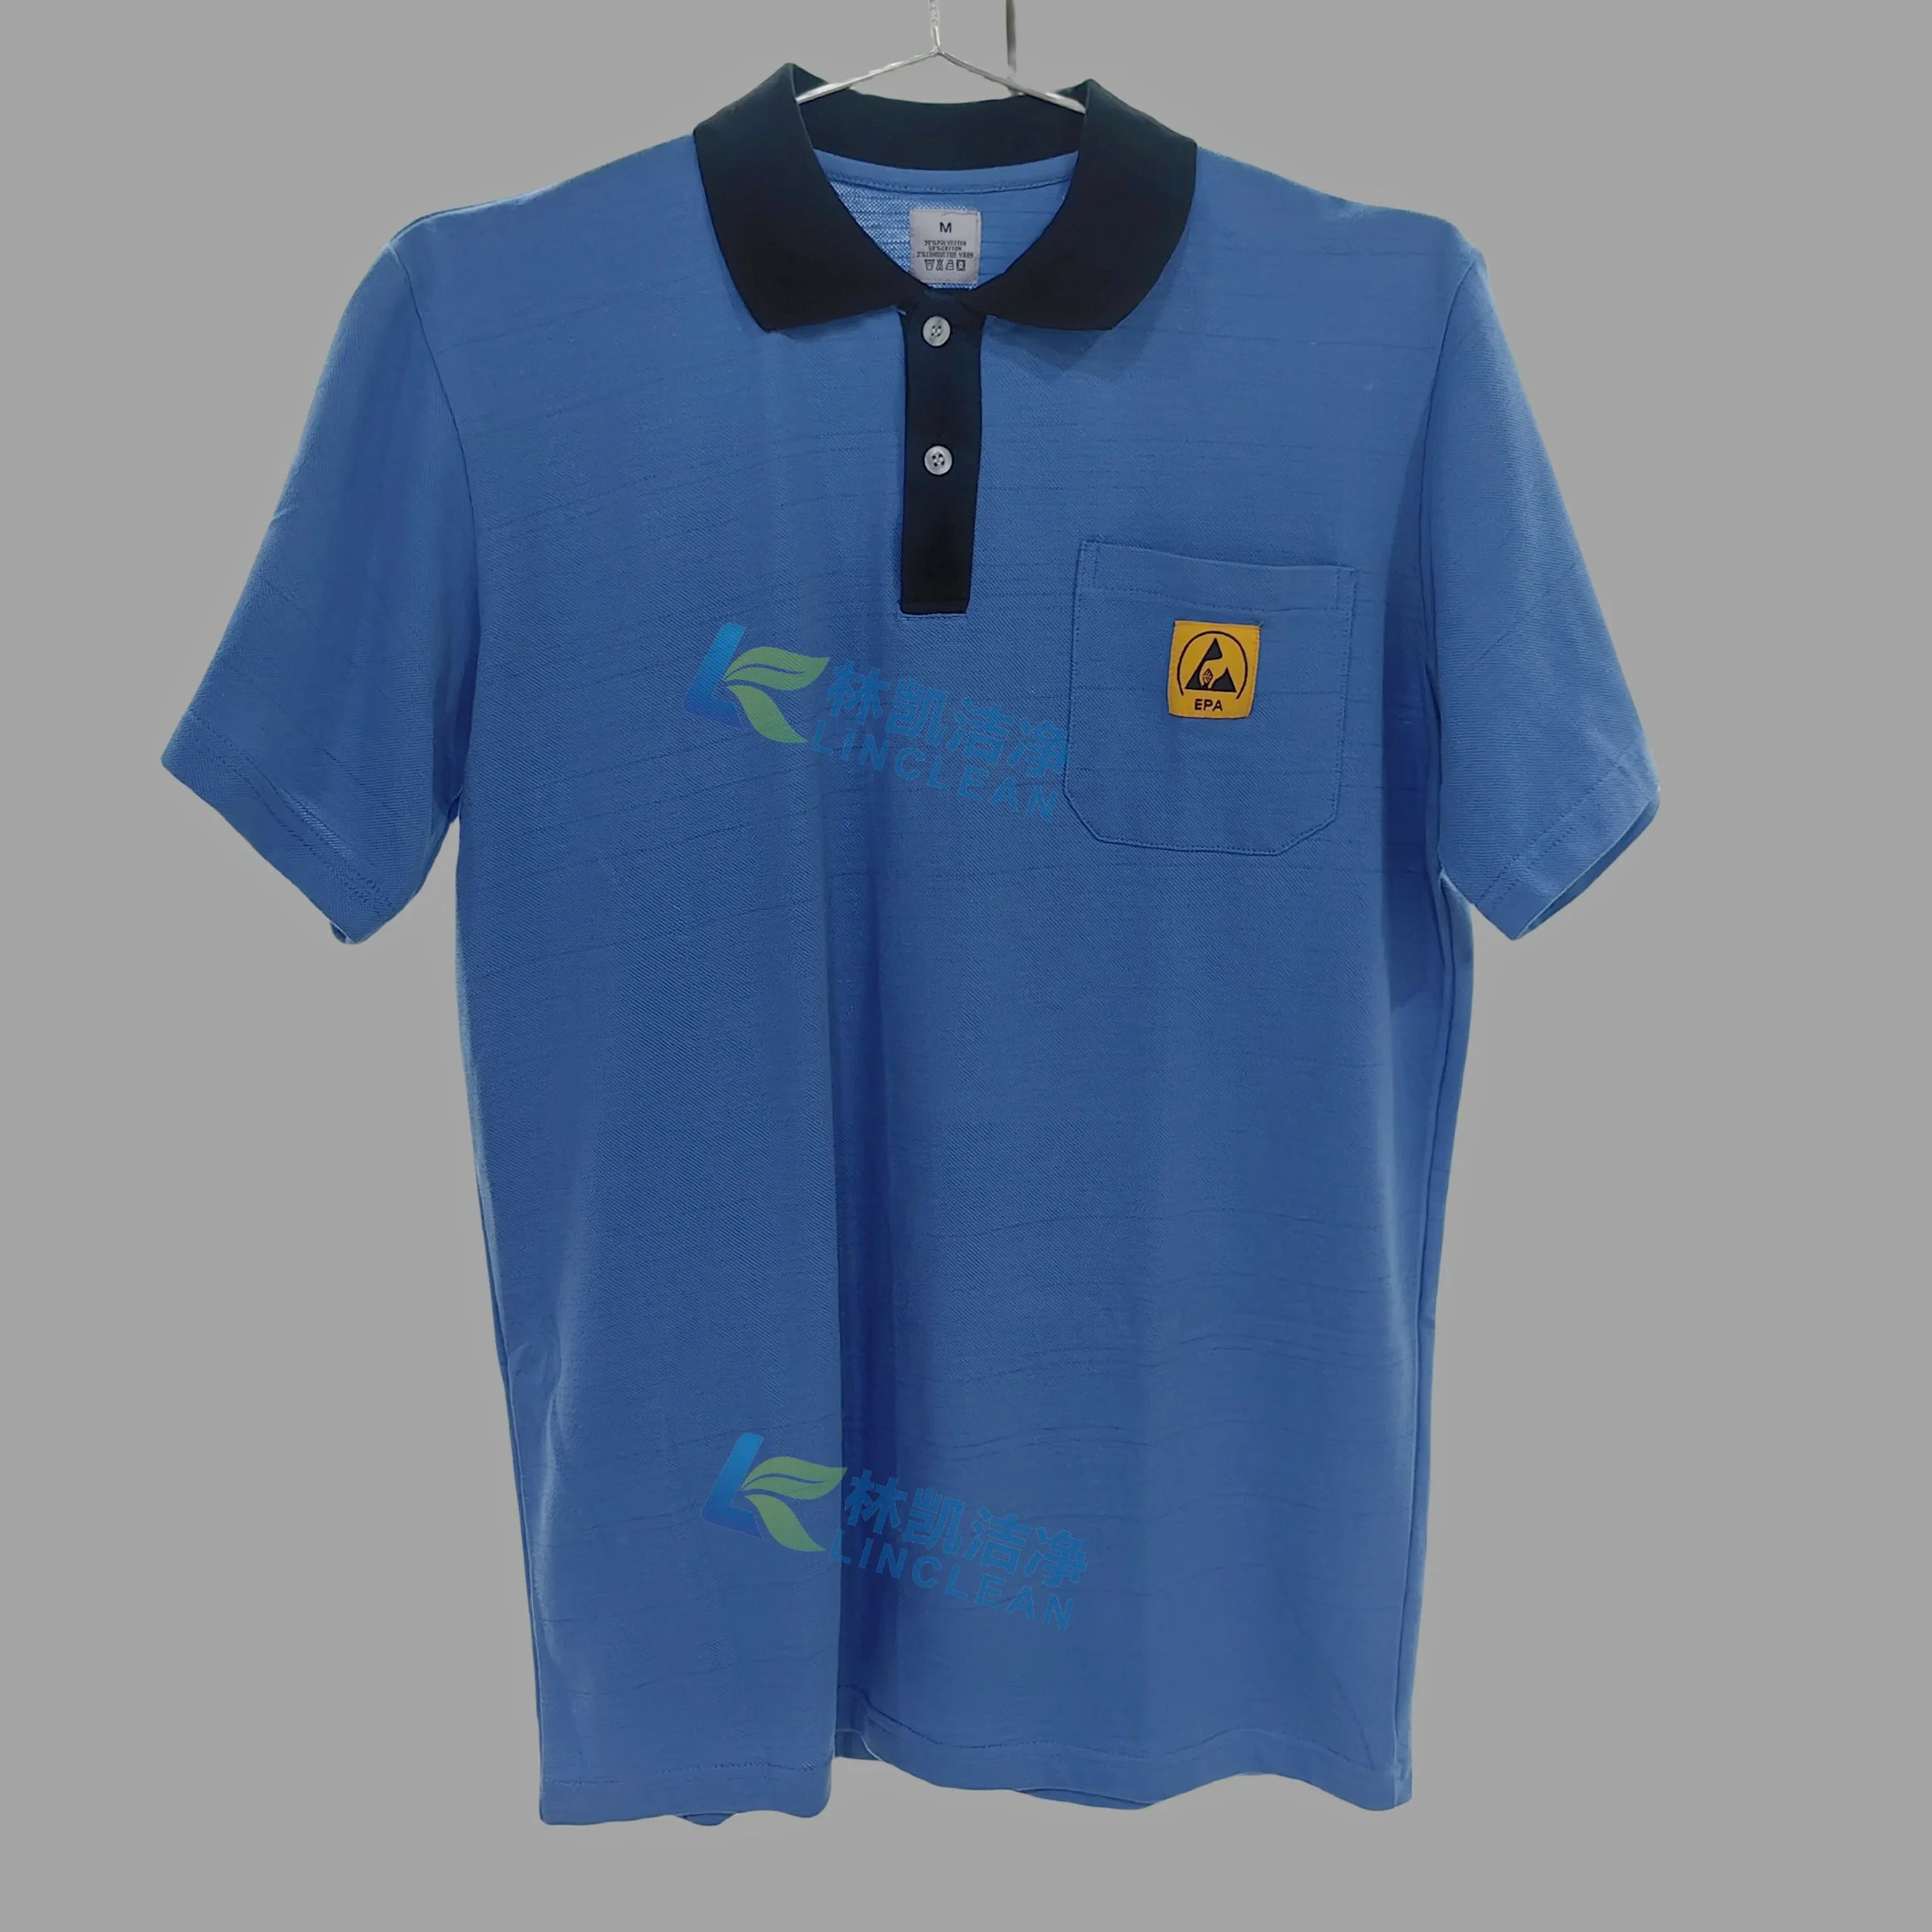 Polyester Cotton Conductive Working Clothing Safety T Shirt Anti-Static Polo ESD Workwear